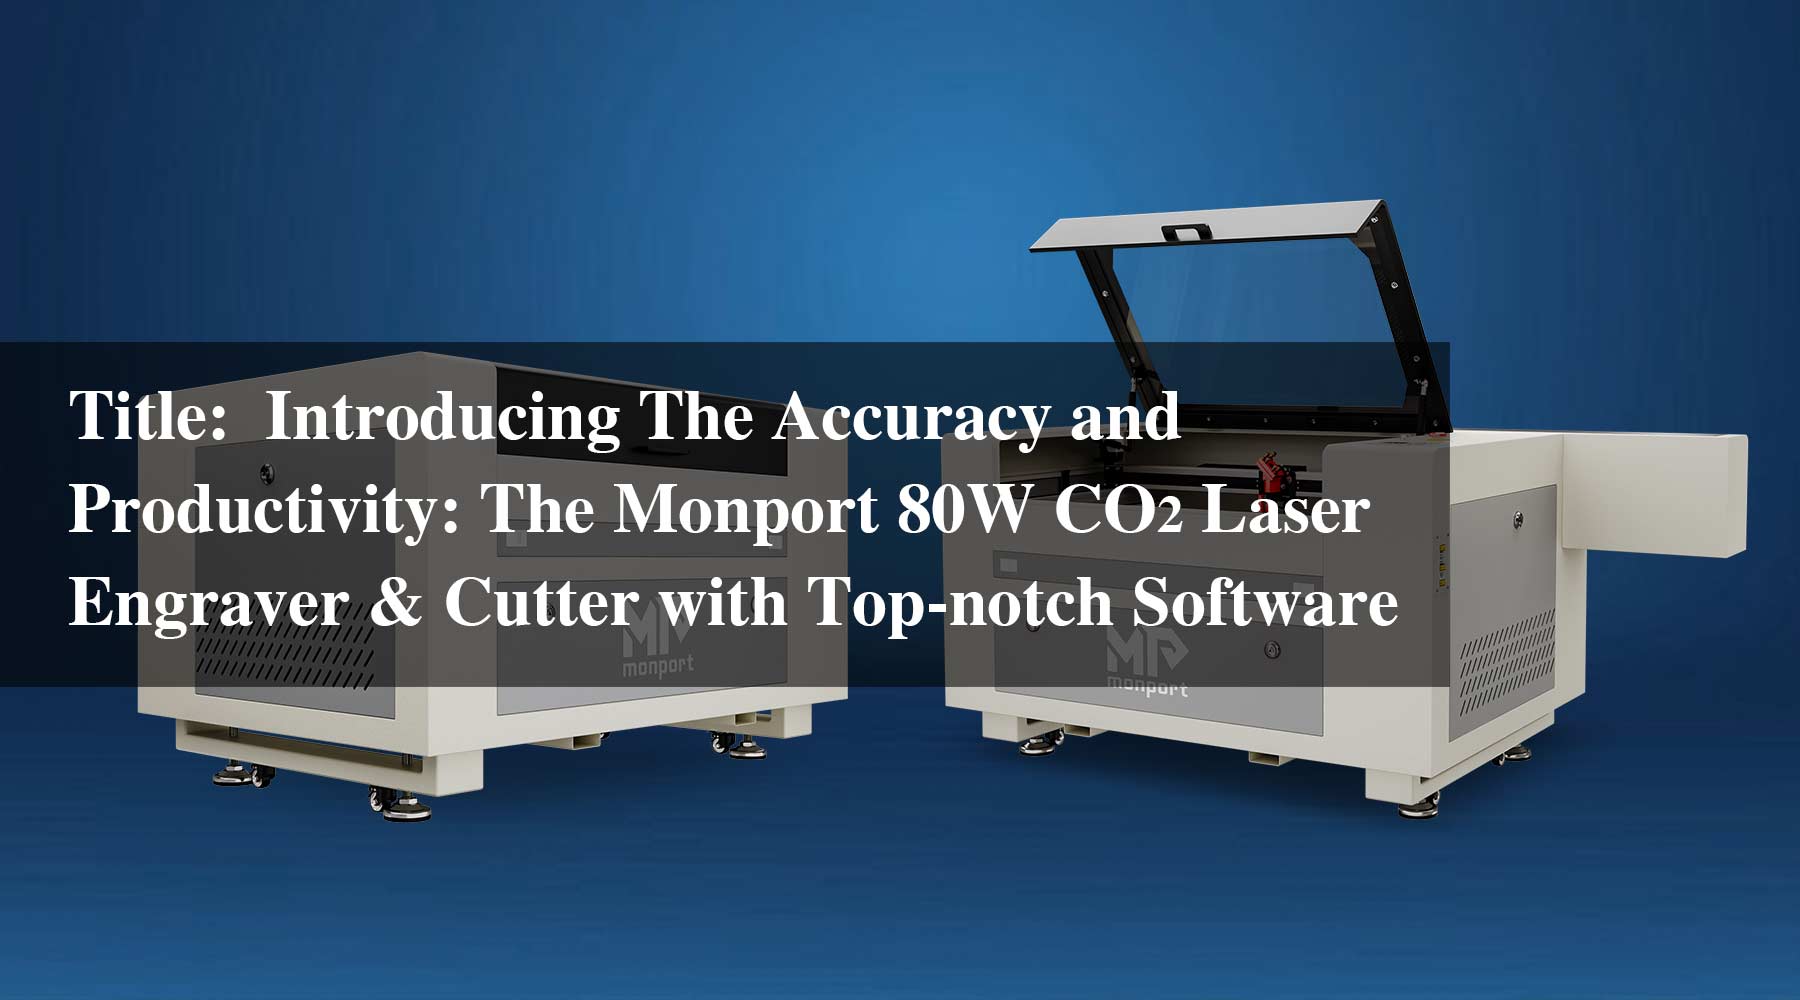 Introducing The Accuracy and Productivity: The Monport 80W CO2 Laser Engraver & Cutter with Top-notch Software